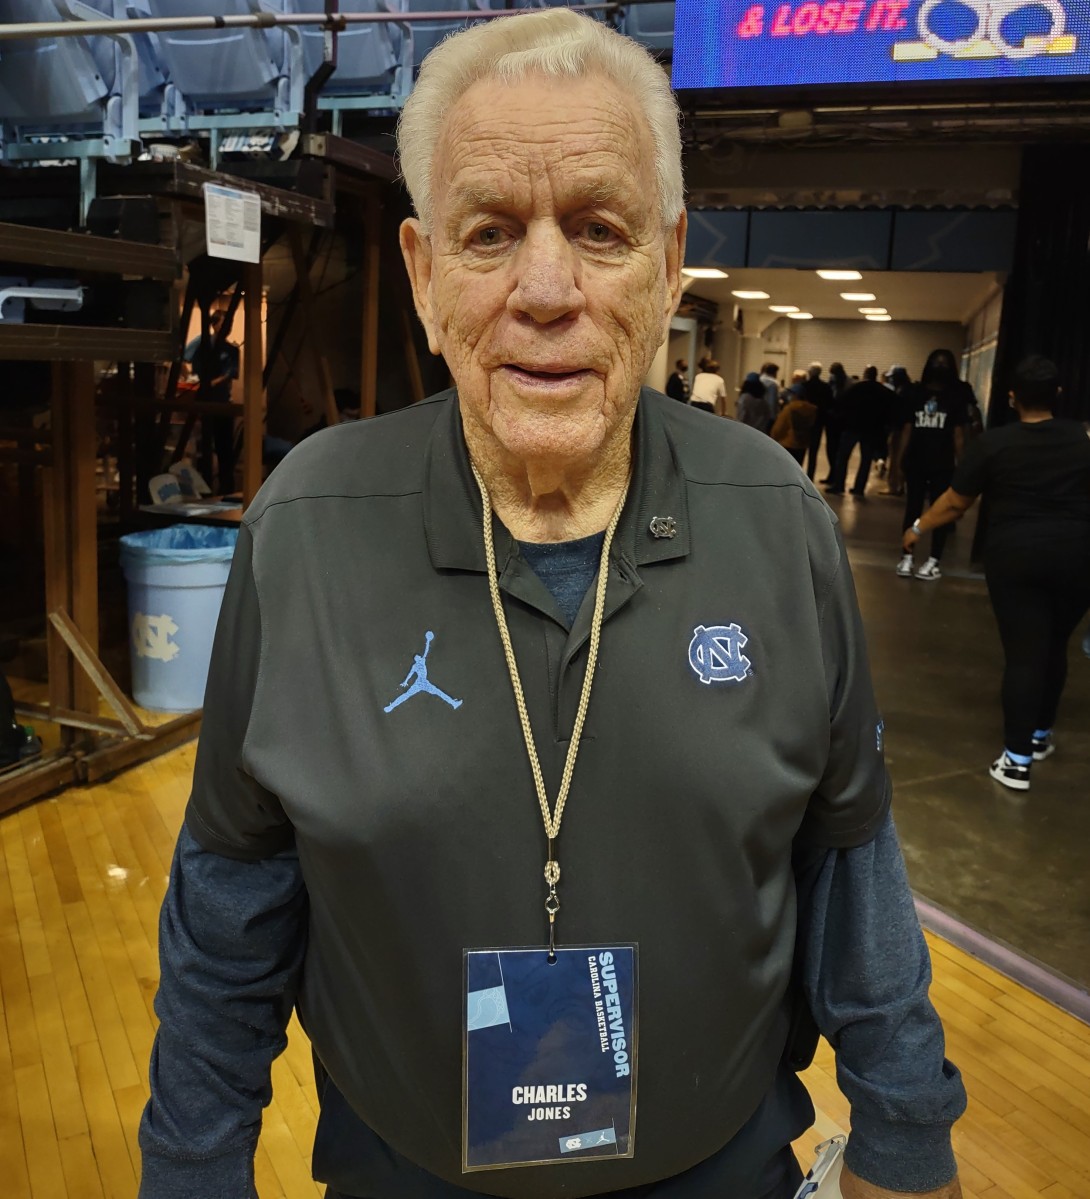 A fixture at UNC Basketball games for 38 years, Charlie Jones works his last game